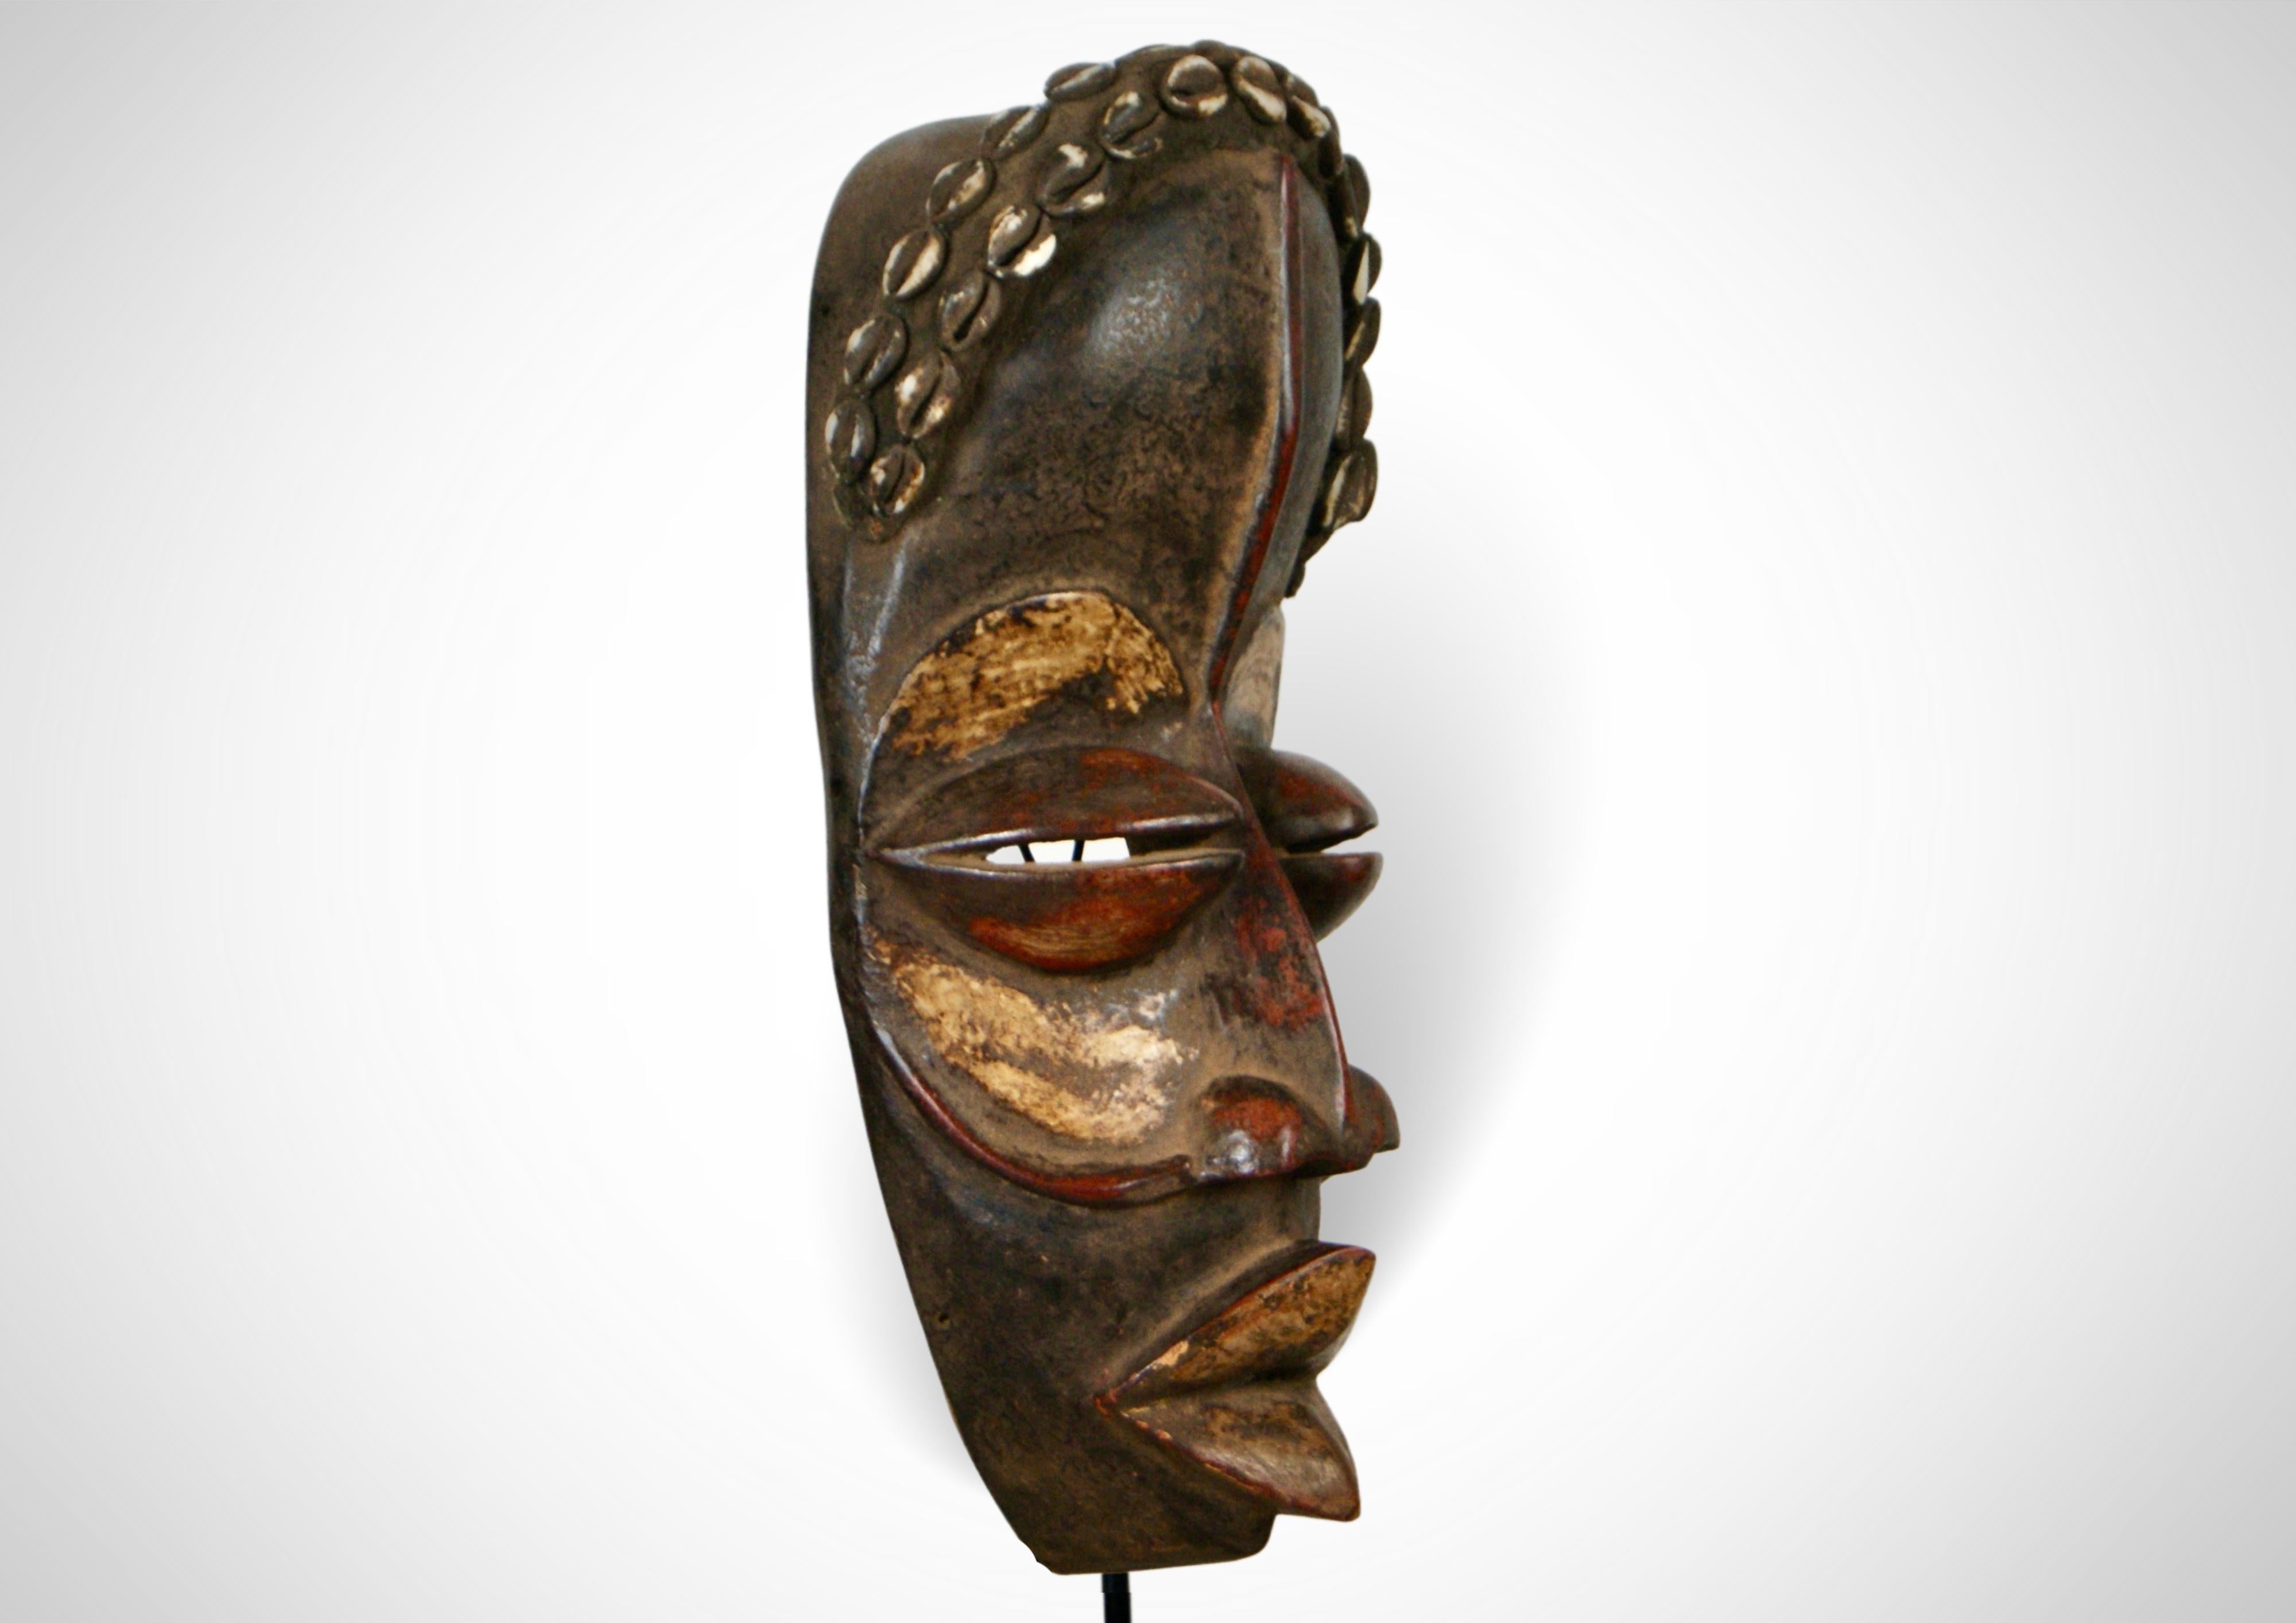 Large sized Dan Mask ('Deangle', 'Dan Gle') from Côte d’Ivoire W.Affrica, circa early 20th century.
 
To the Dan people, the 'Deangle' embodies the spirit of an individual ancestor during masquerade performance.
These masks are worn as masquerades